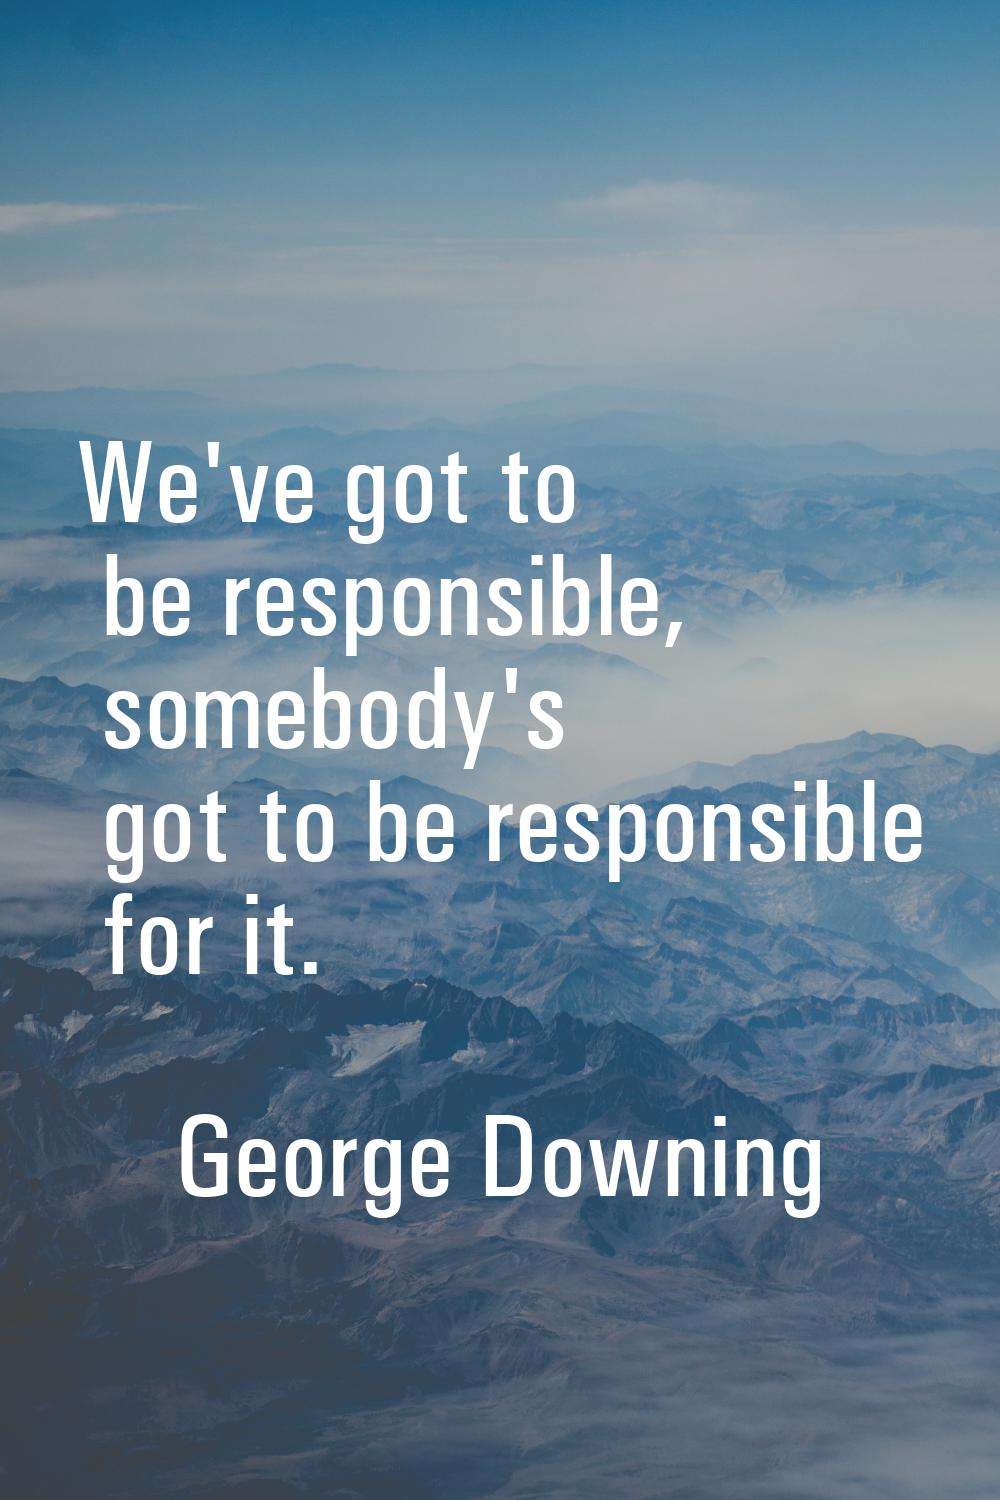 We've got to be responsible, somebody's got to be responsible for it.